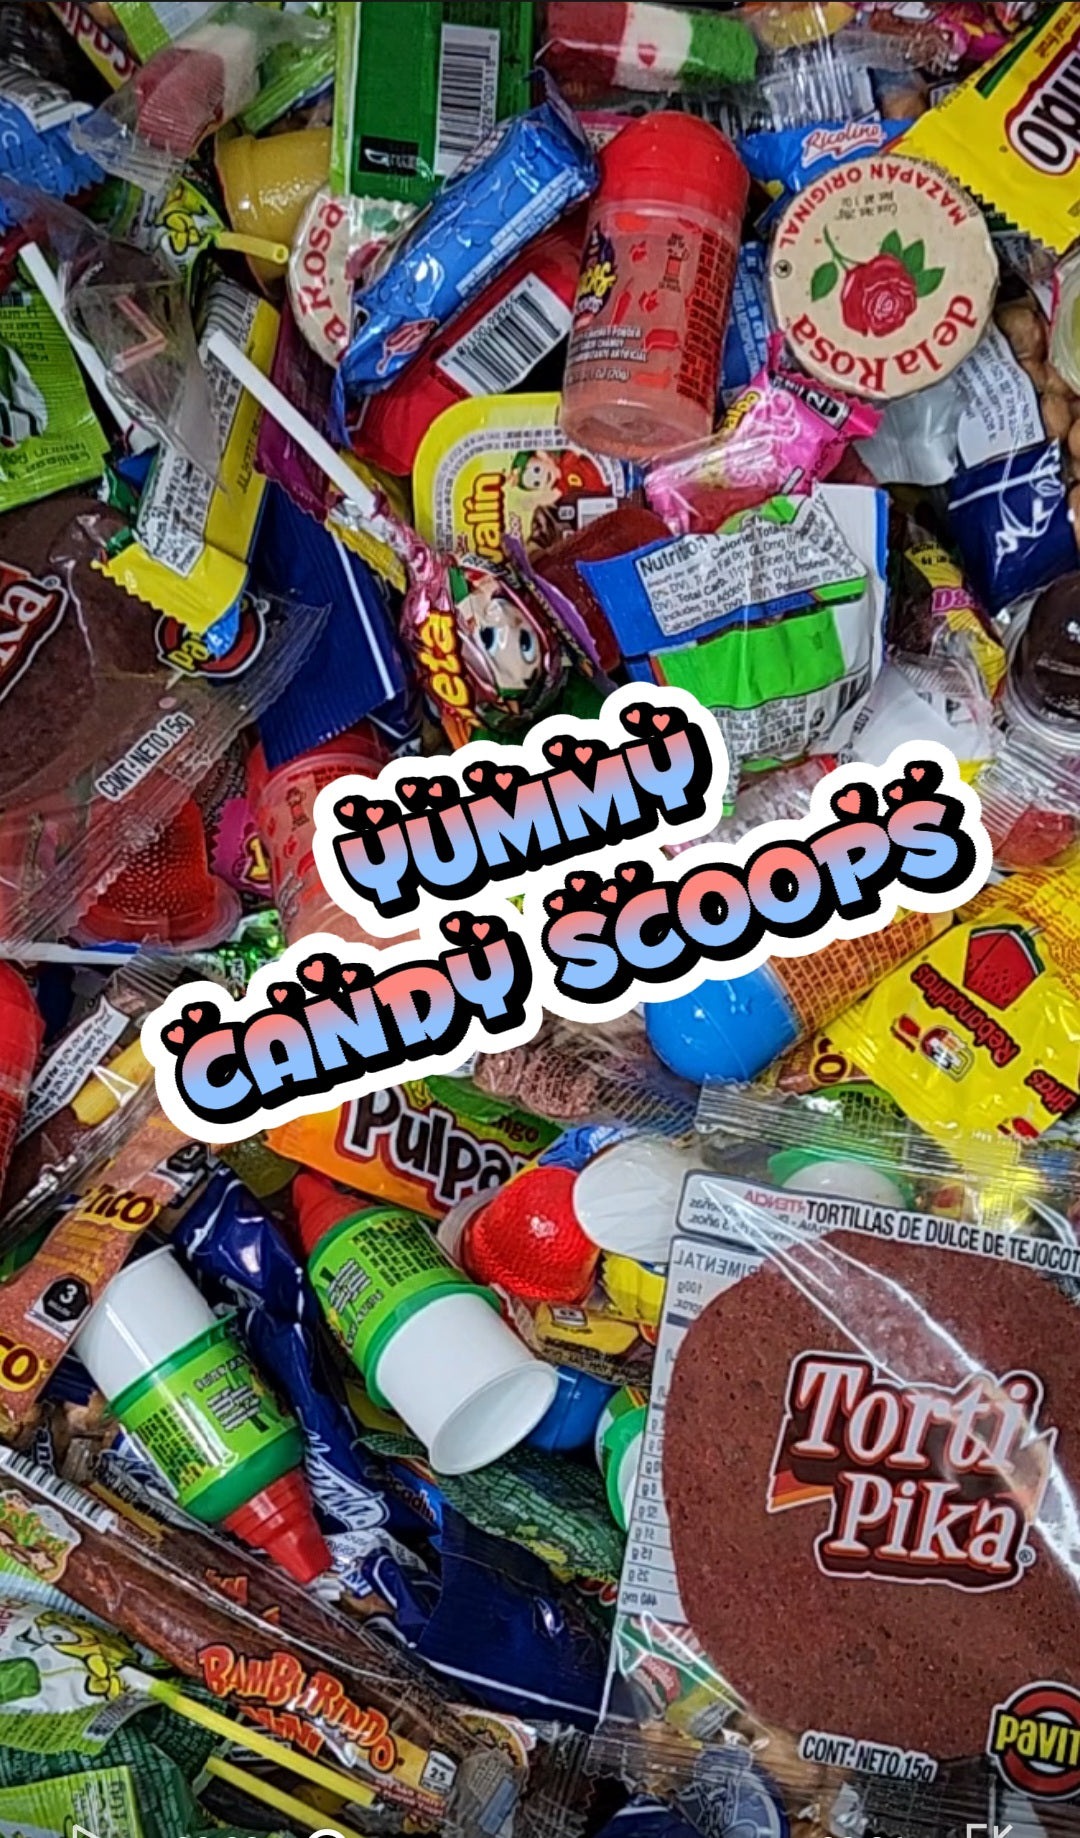 Yummy Candy Scoops